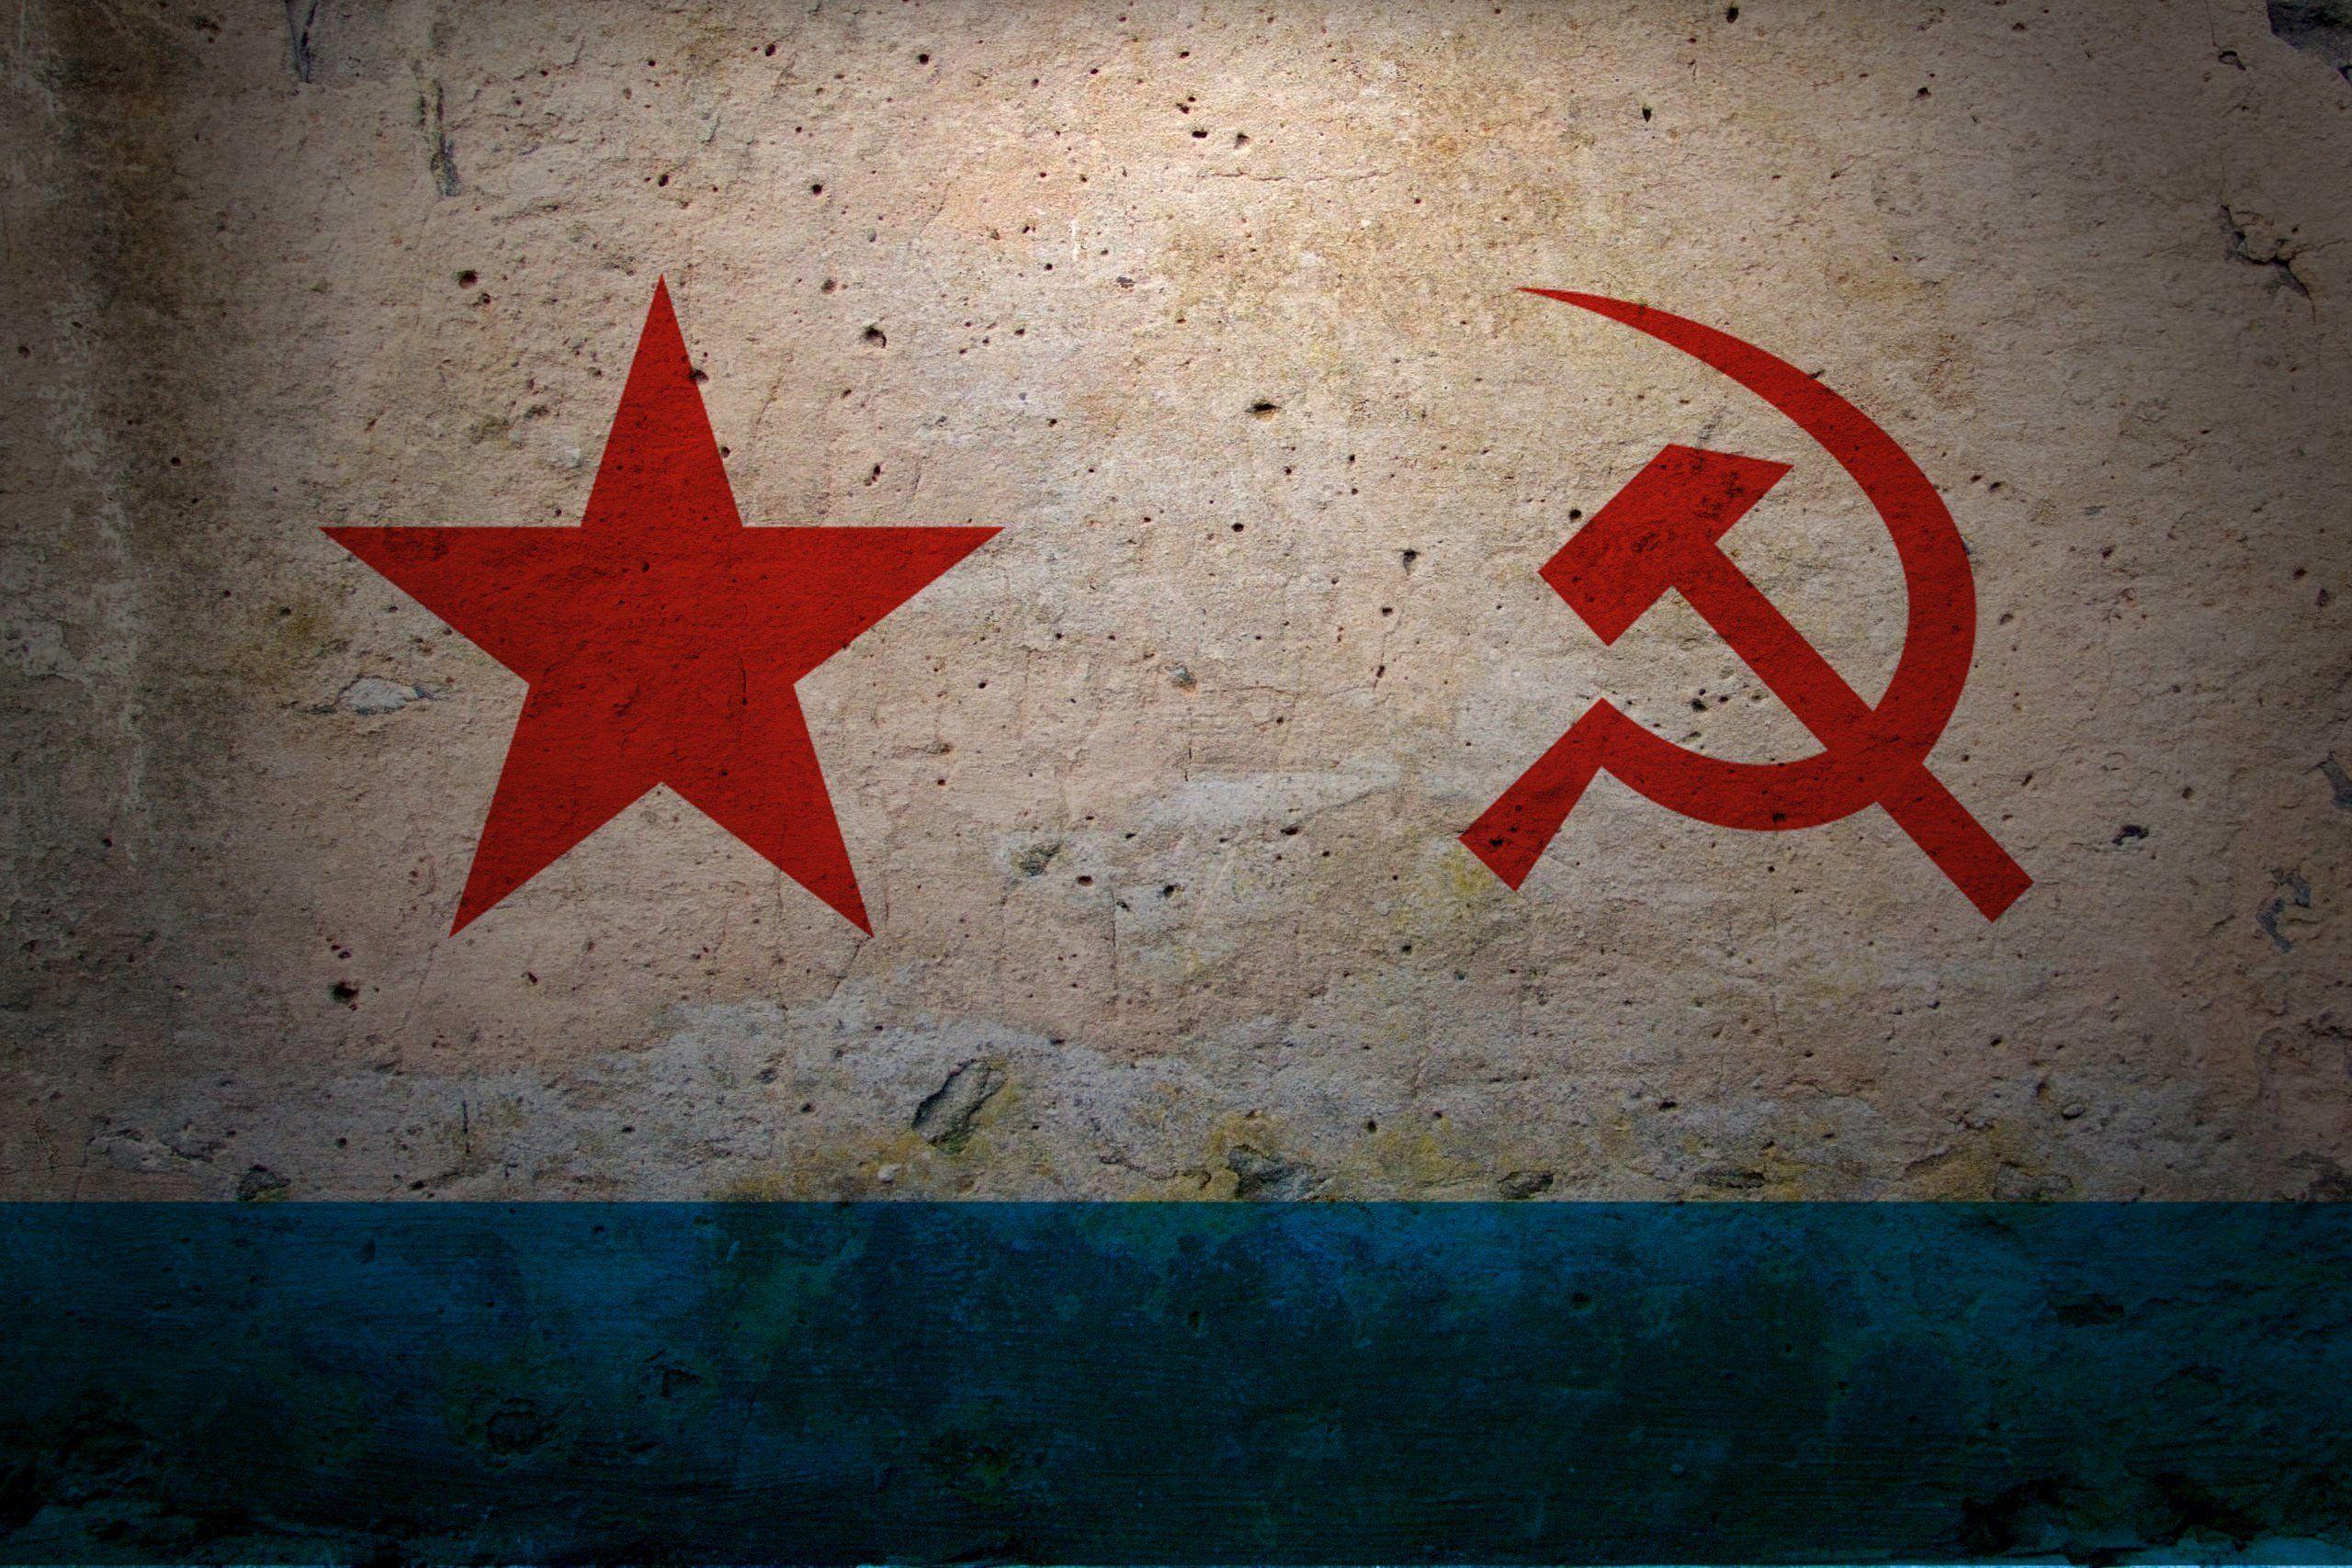 Soviet Union Flag Wallpapers - Wallpaper Cave